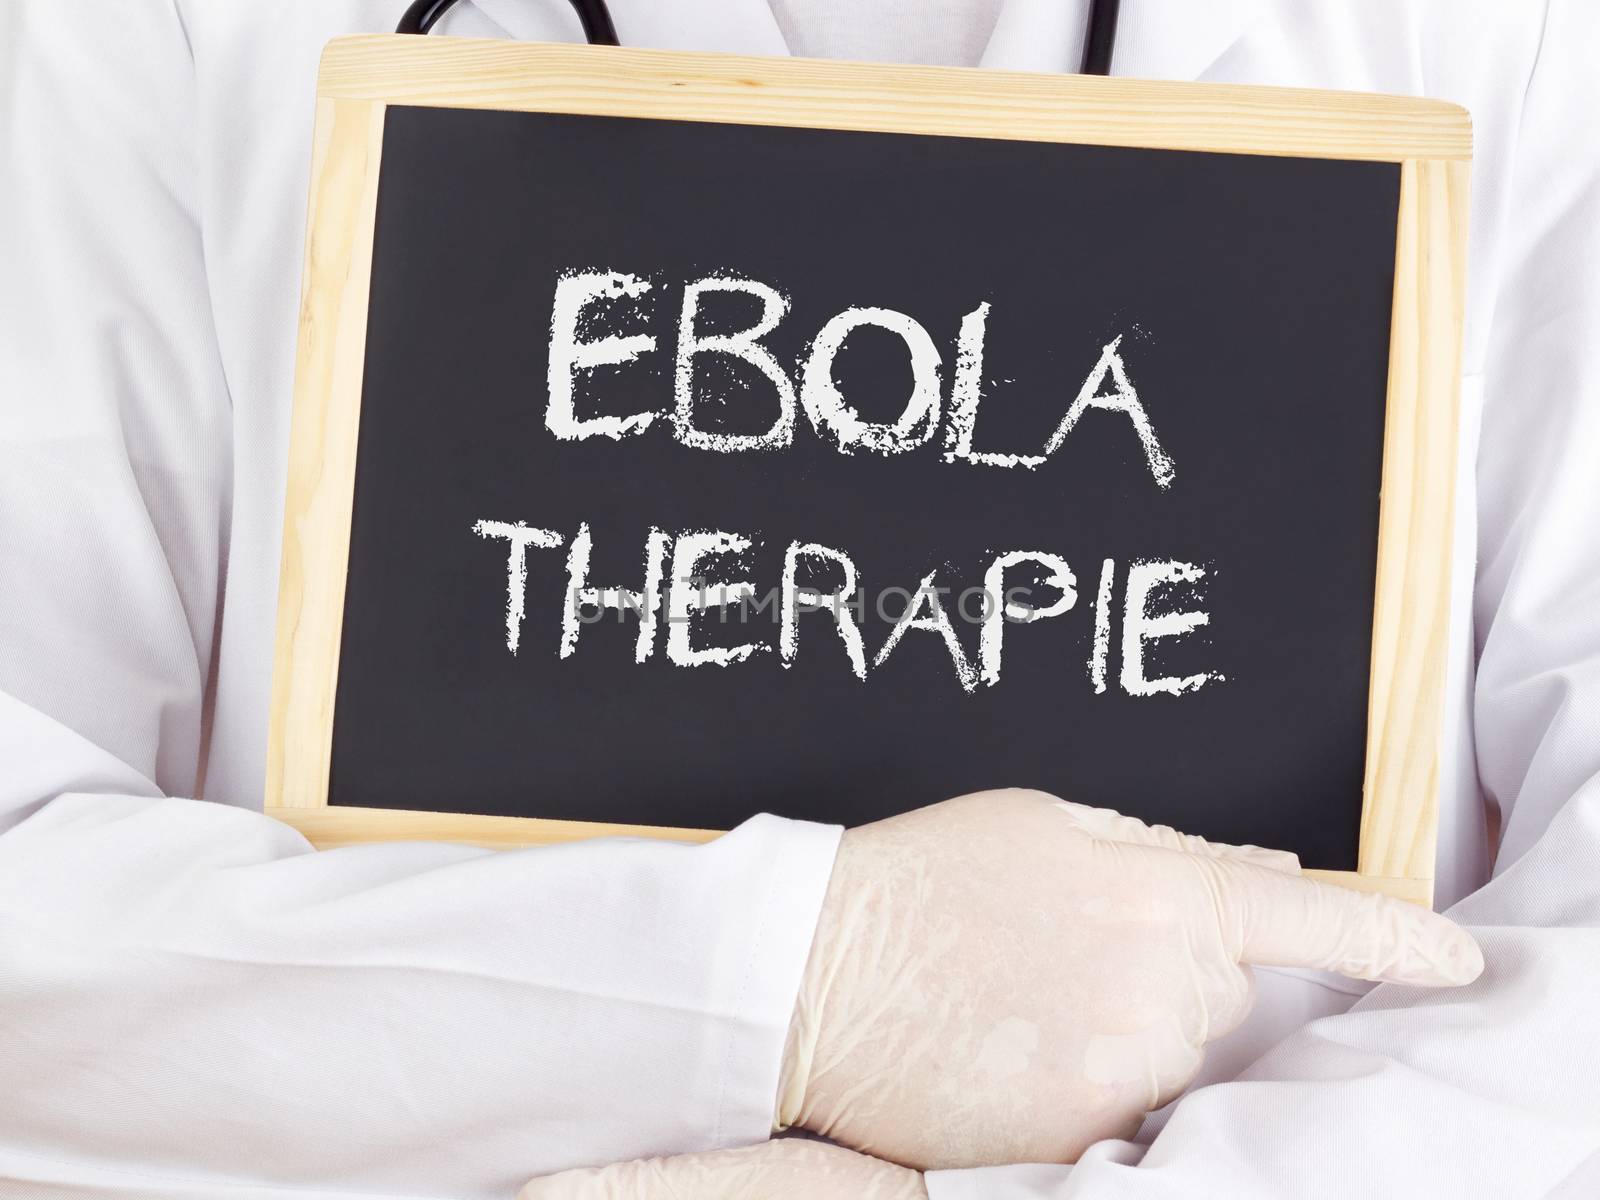 Doctor shows information: Ebola therapy in german language by gwolters